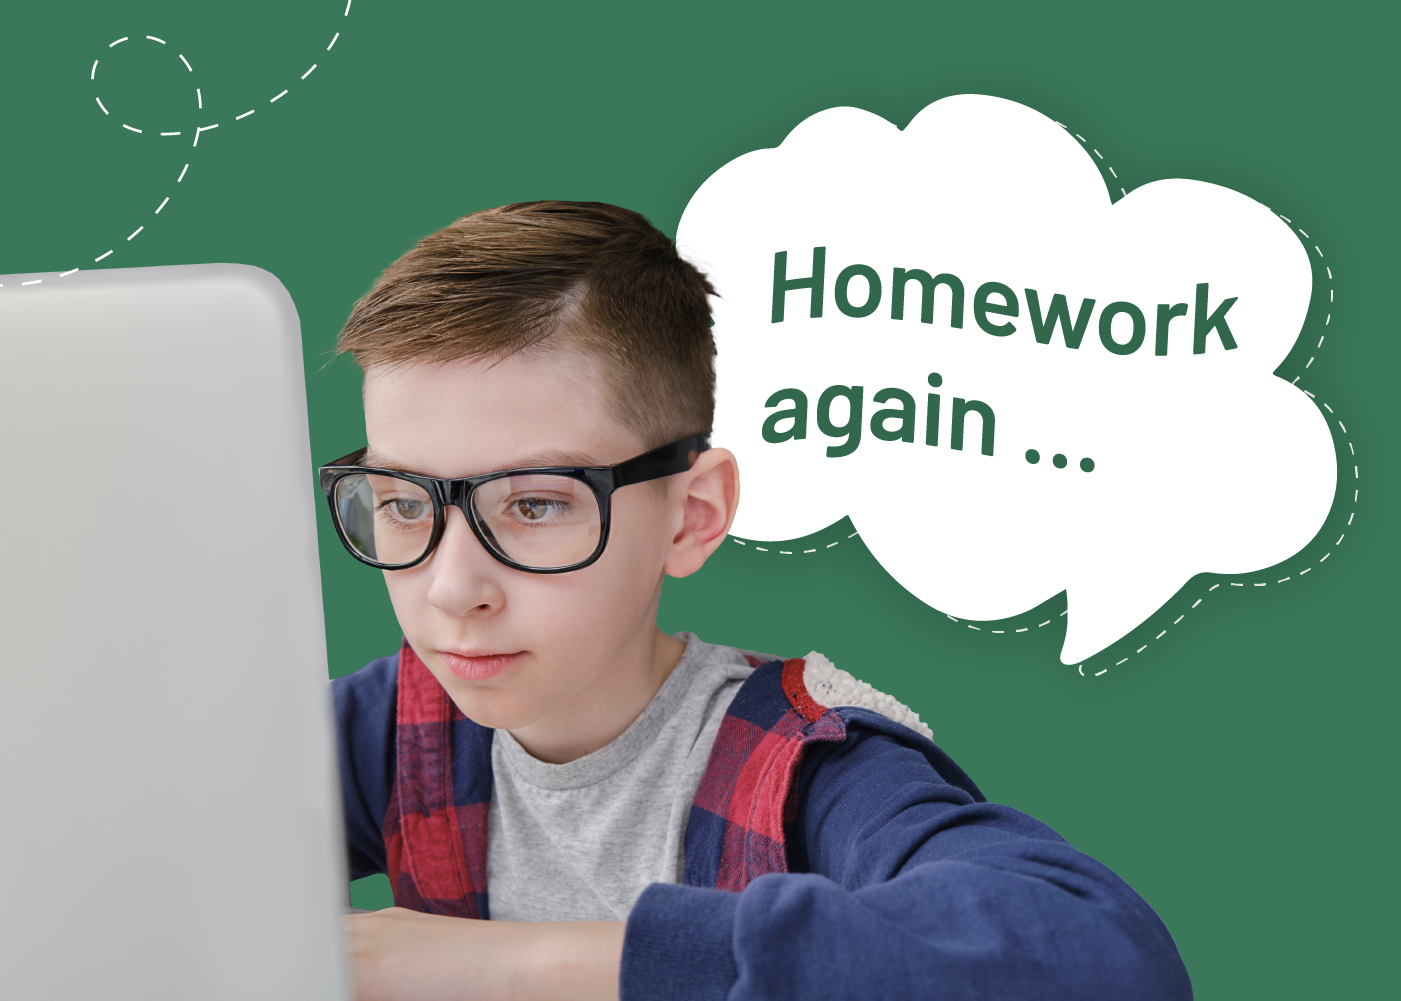 is homework beneficial or harmful for students learning